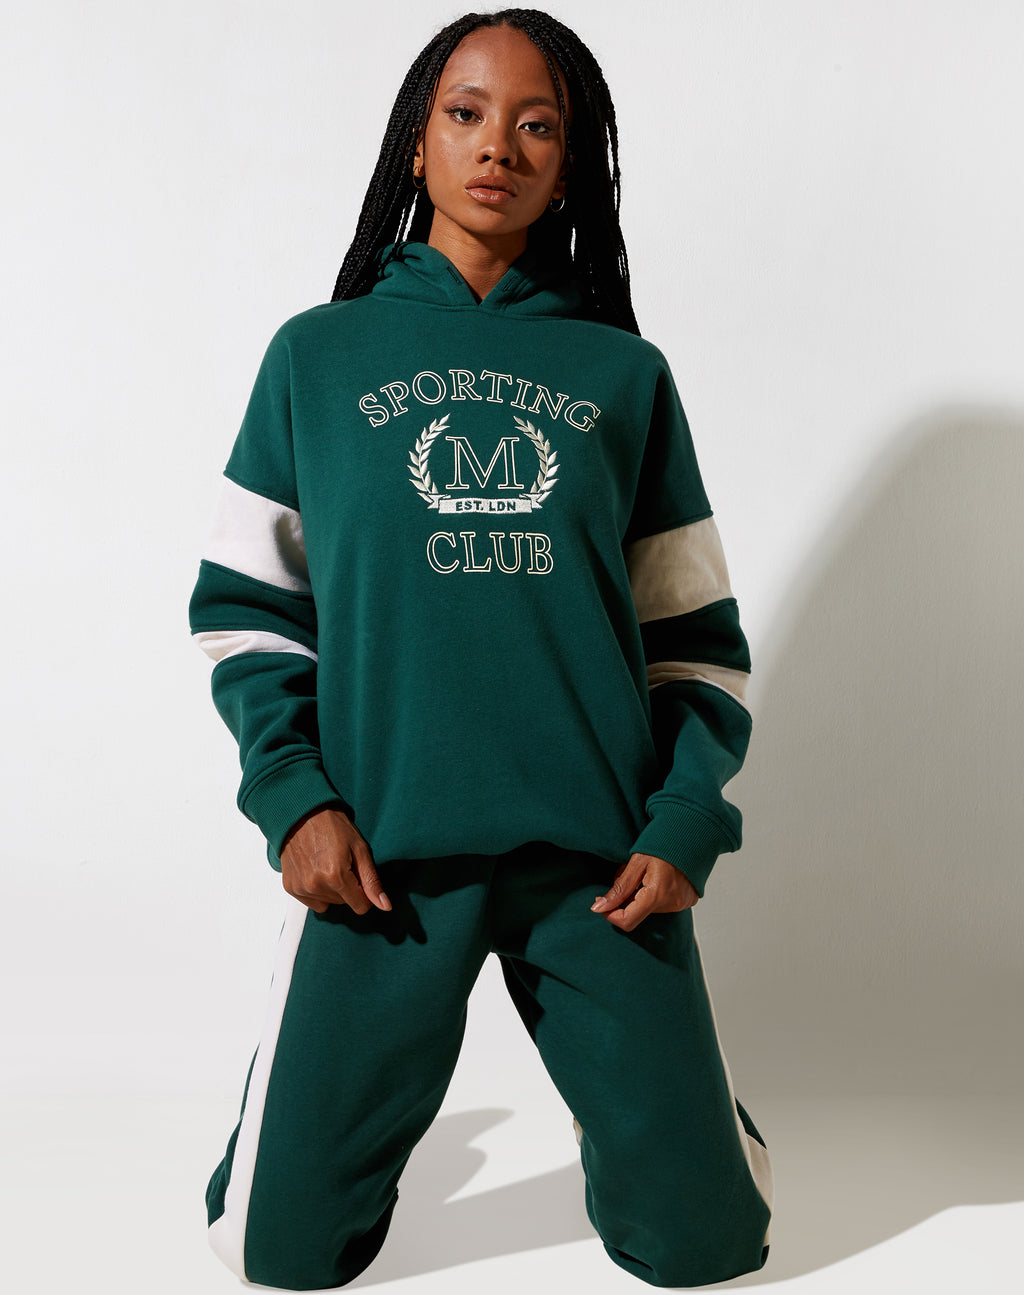 Mora Hoodie in Forest Green and Winter White Sporting Club Mix Embro